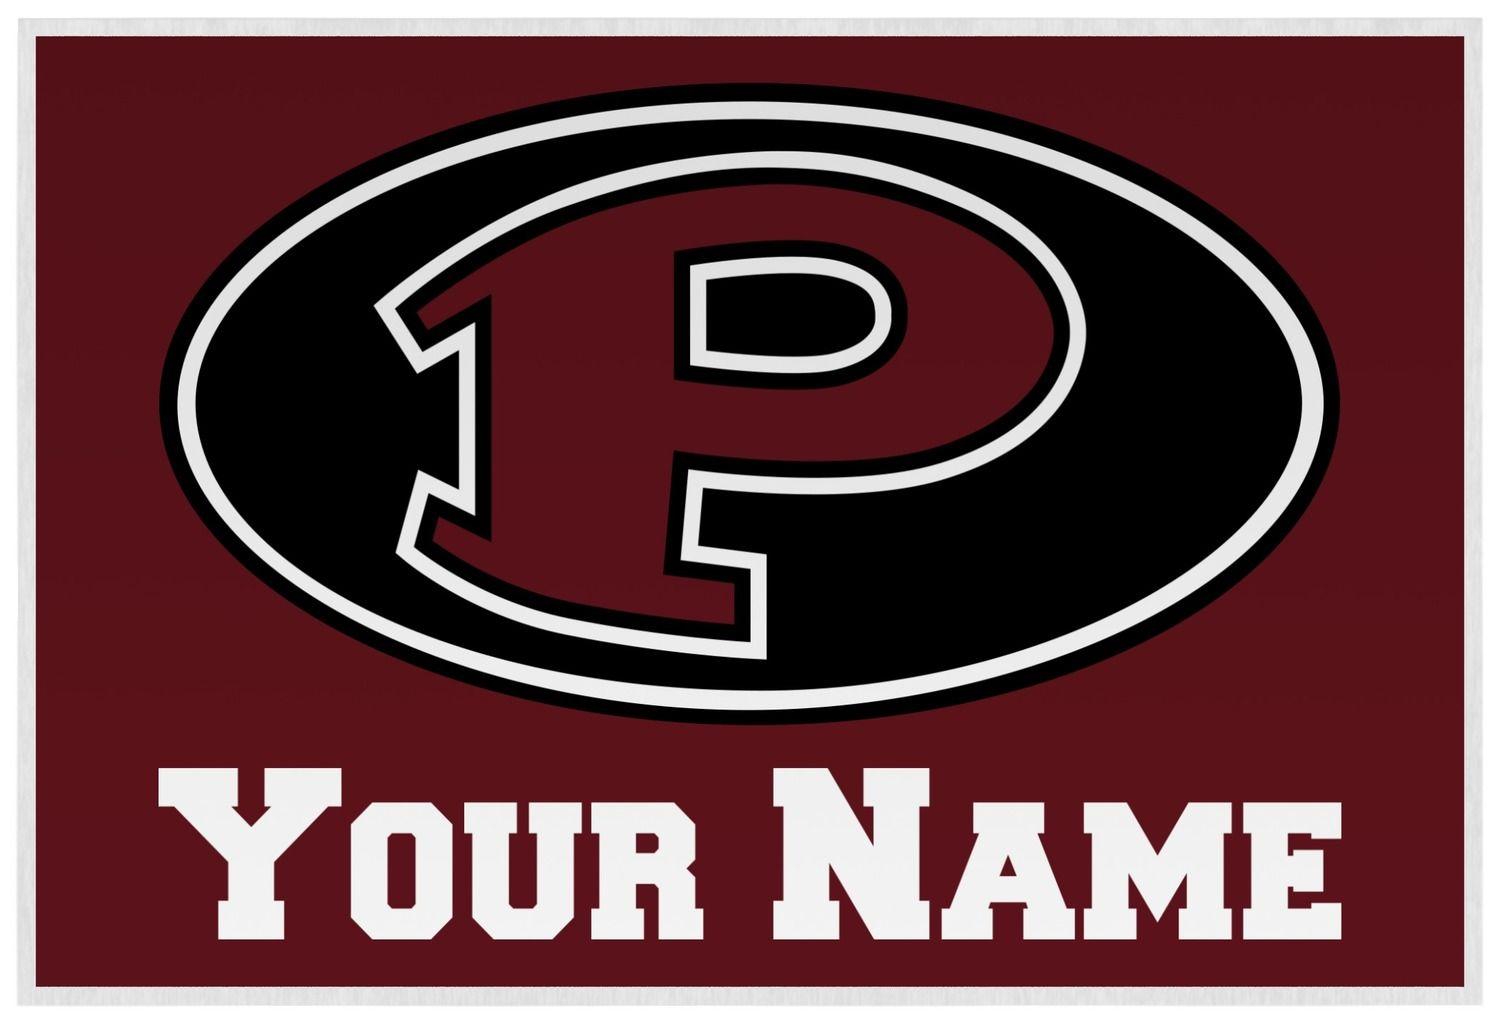 Pearland P Logo - Pearland Oilers 